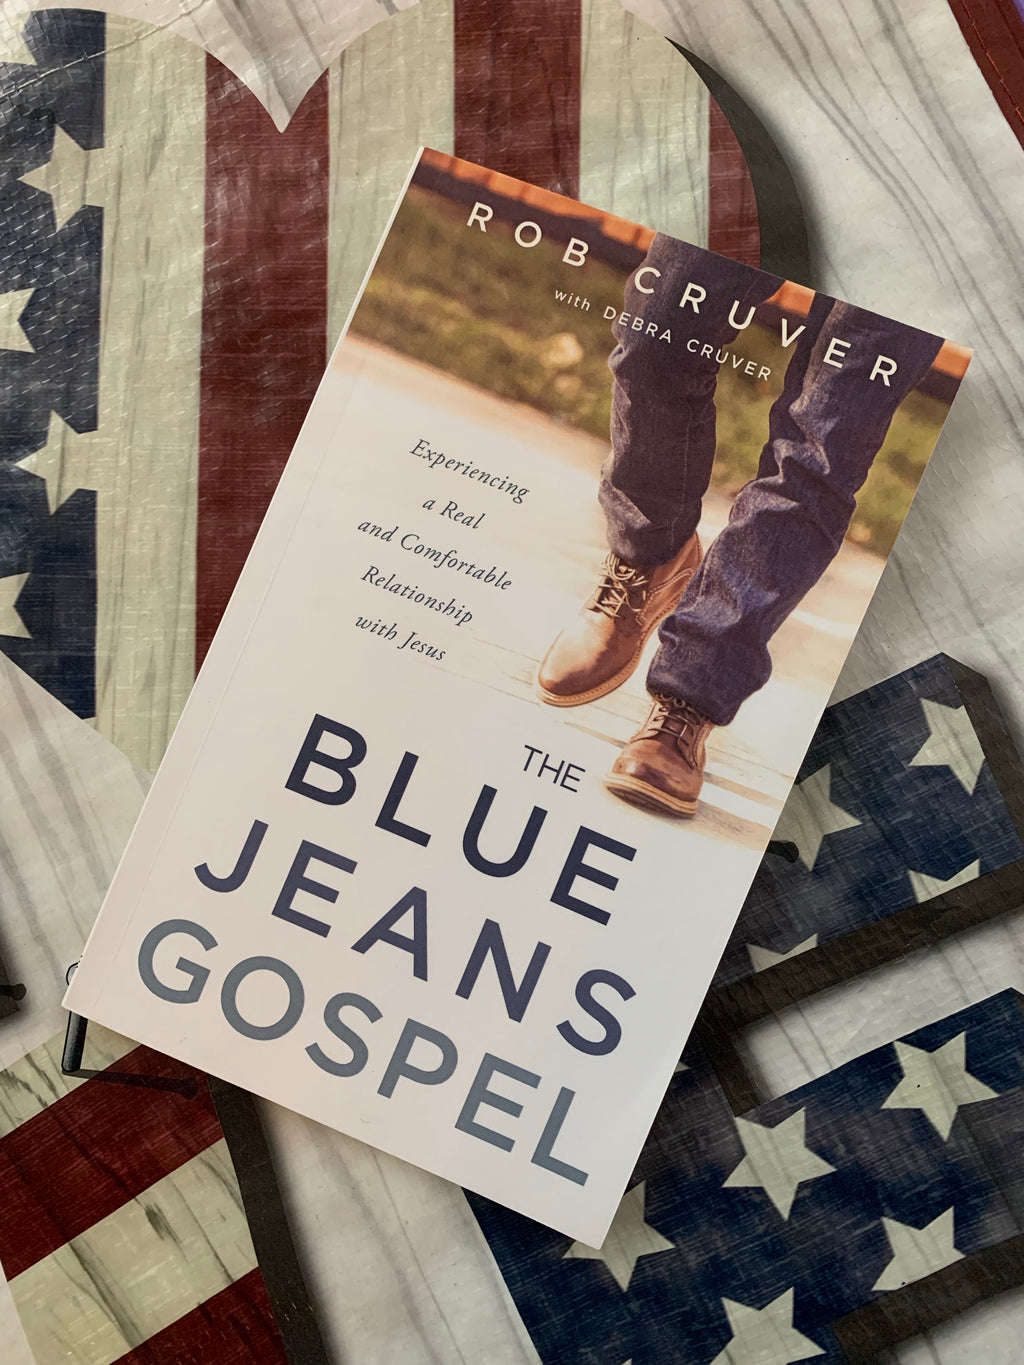 The Blue Jeans Gospel- By Rob Cruver with Debra Cruver